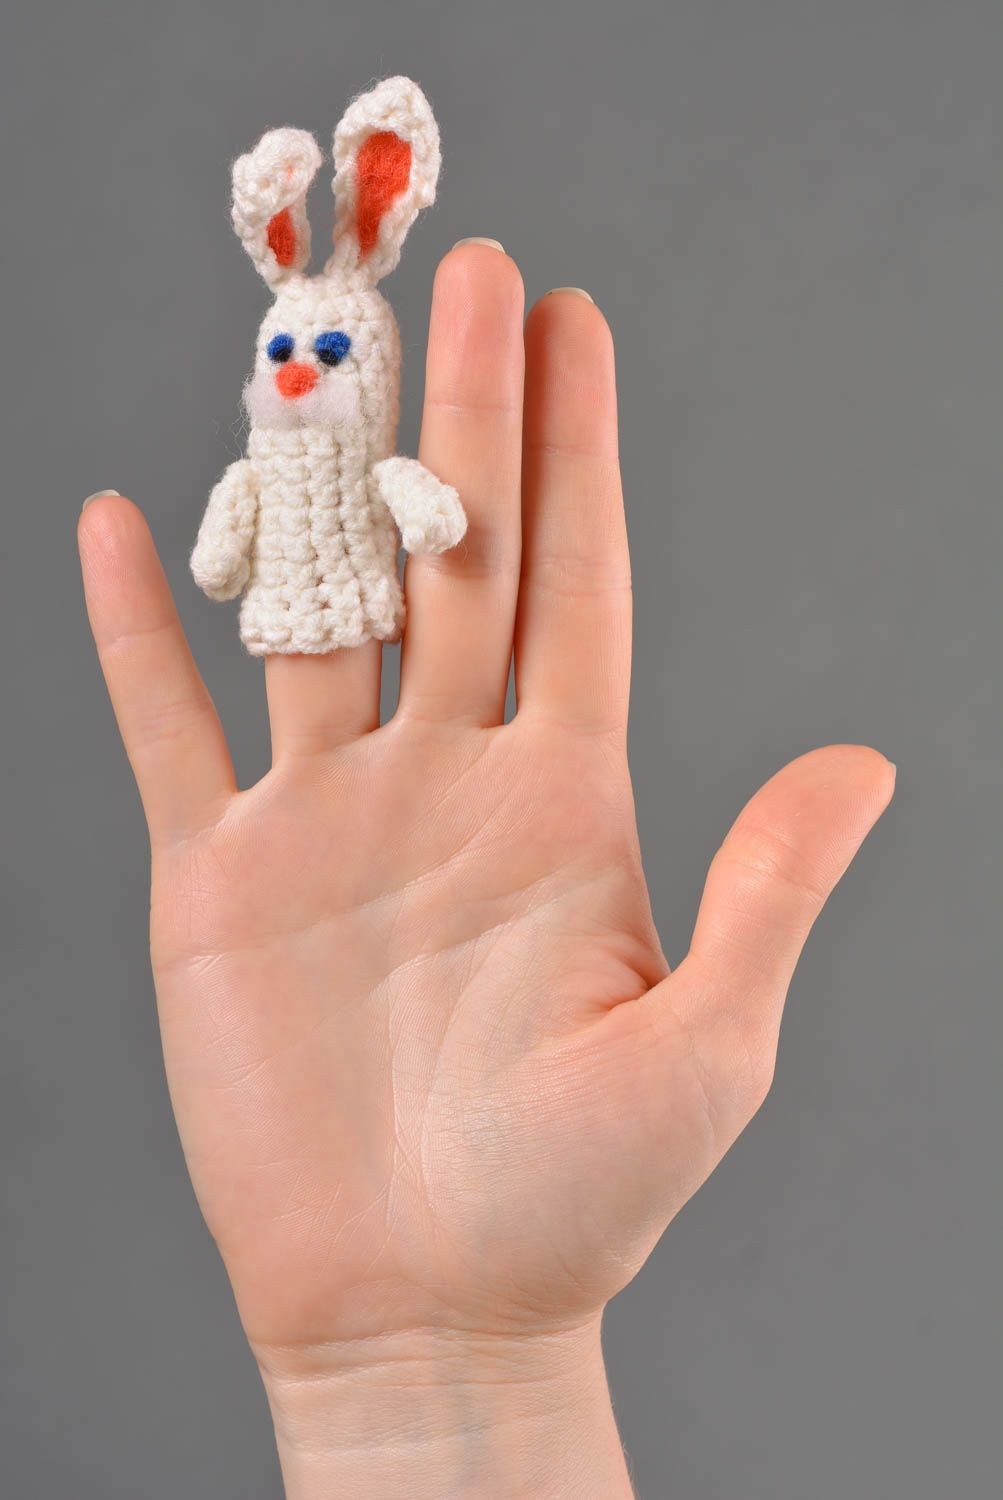 Unusual handmade crochet toy birthday gift ideas baby toys the marionette photo 3